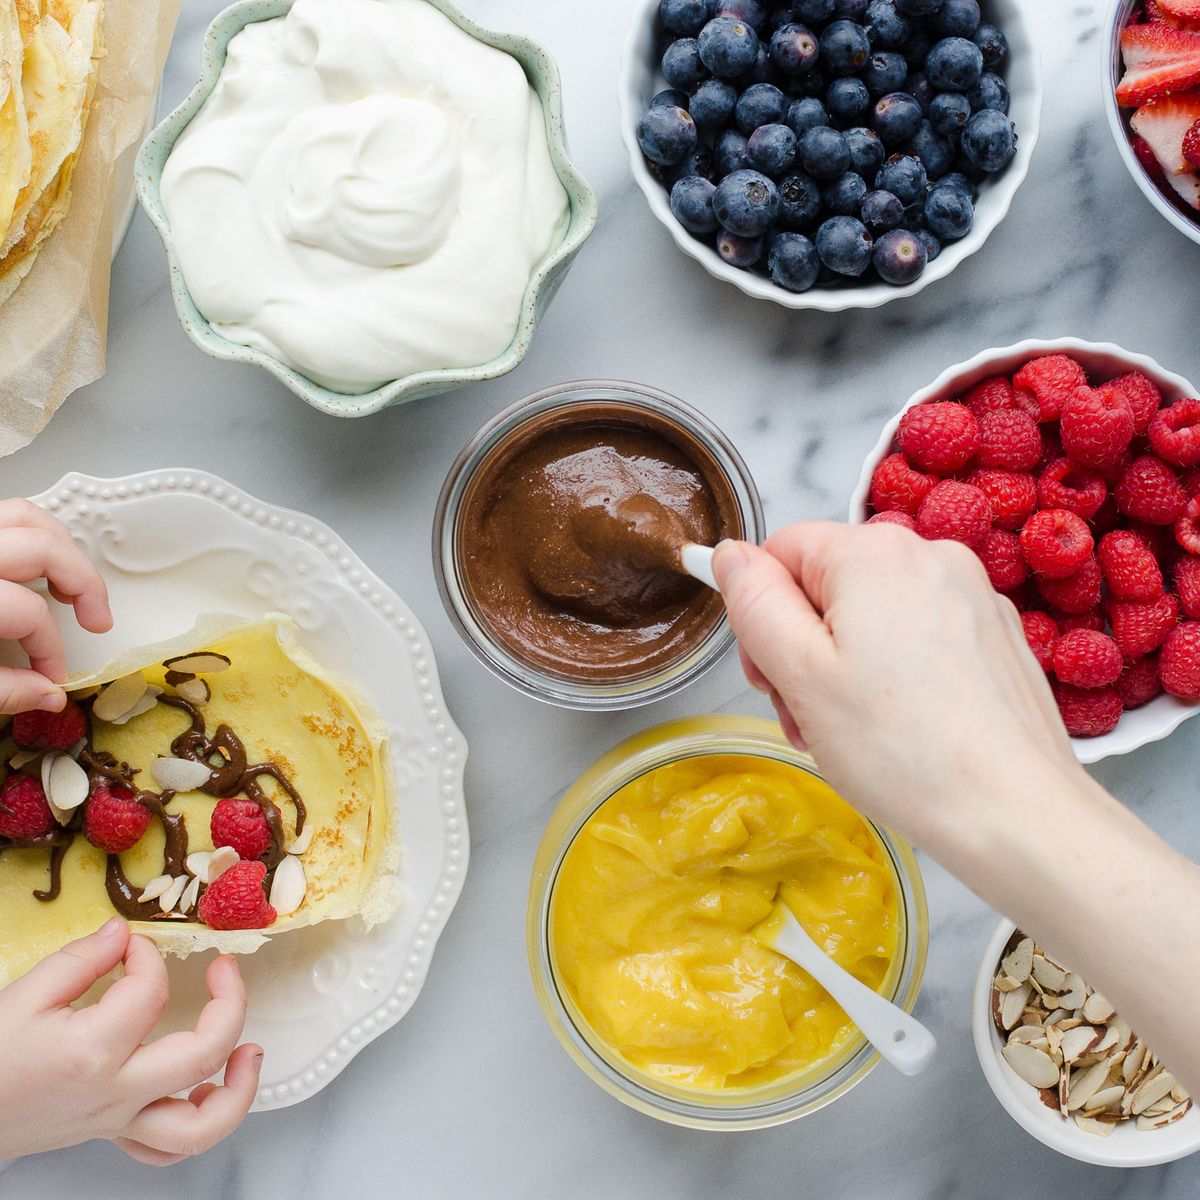 How to Set Up a Crepe Bar